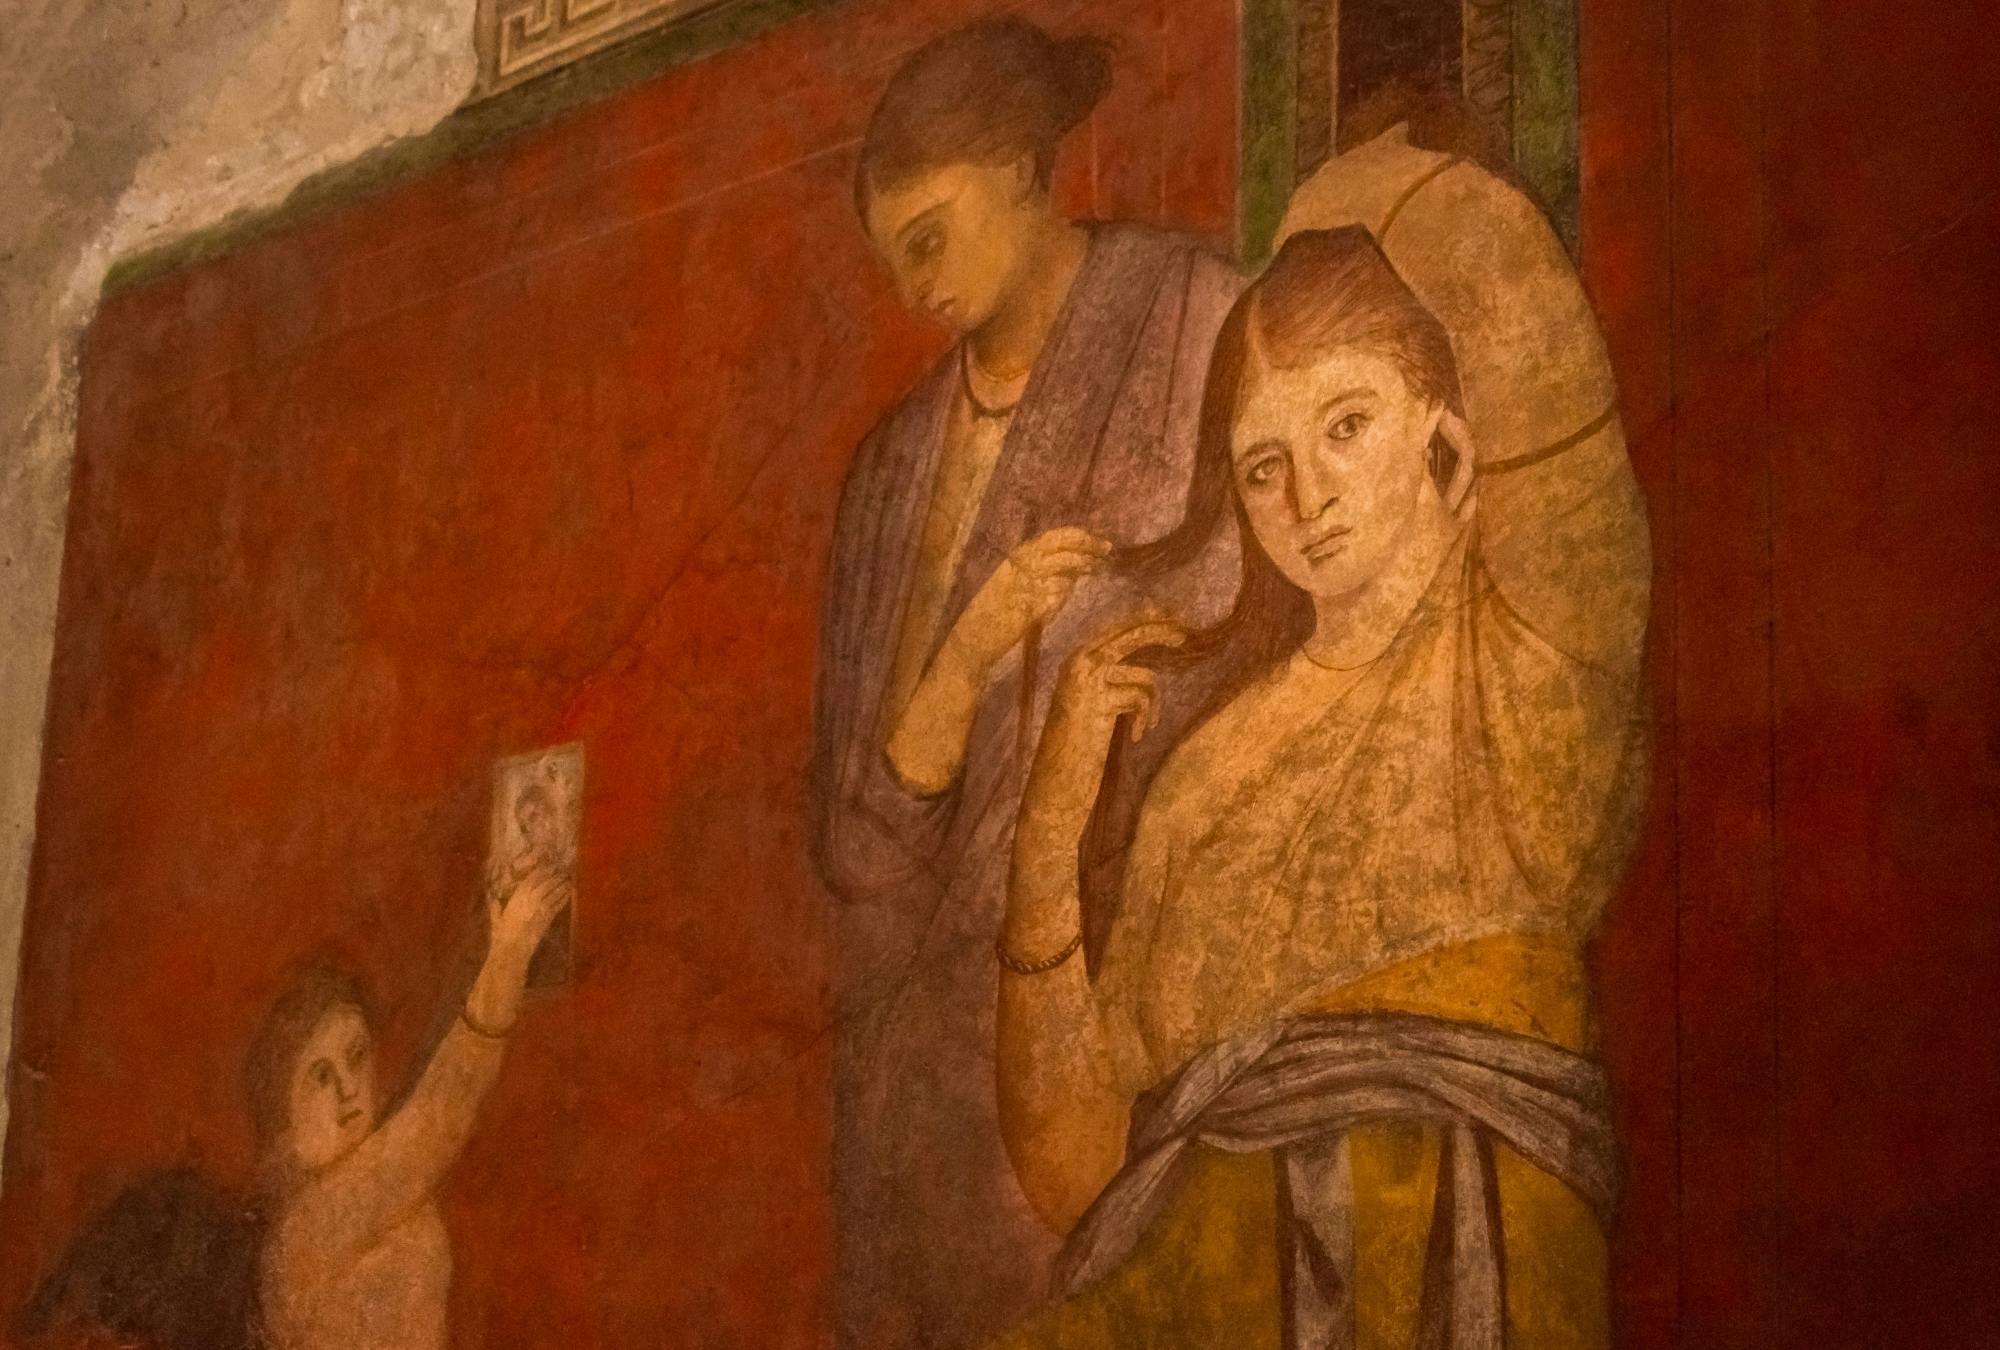 Pompeii's Villa of the Mysteries Exclusive Archaeologist-led Tour